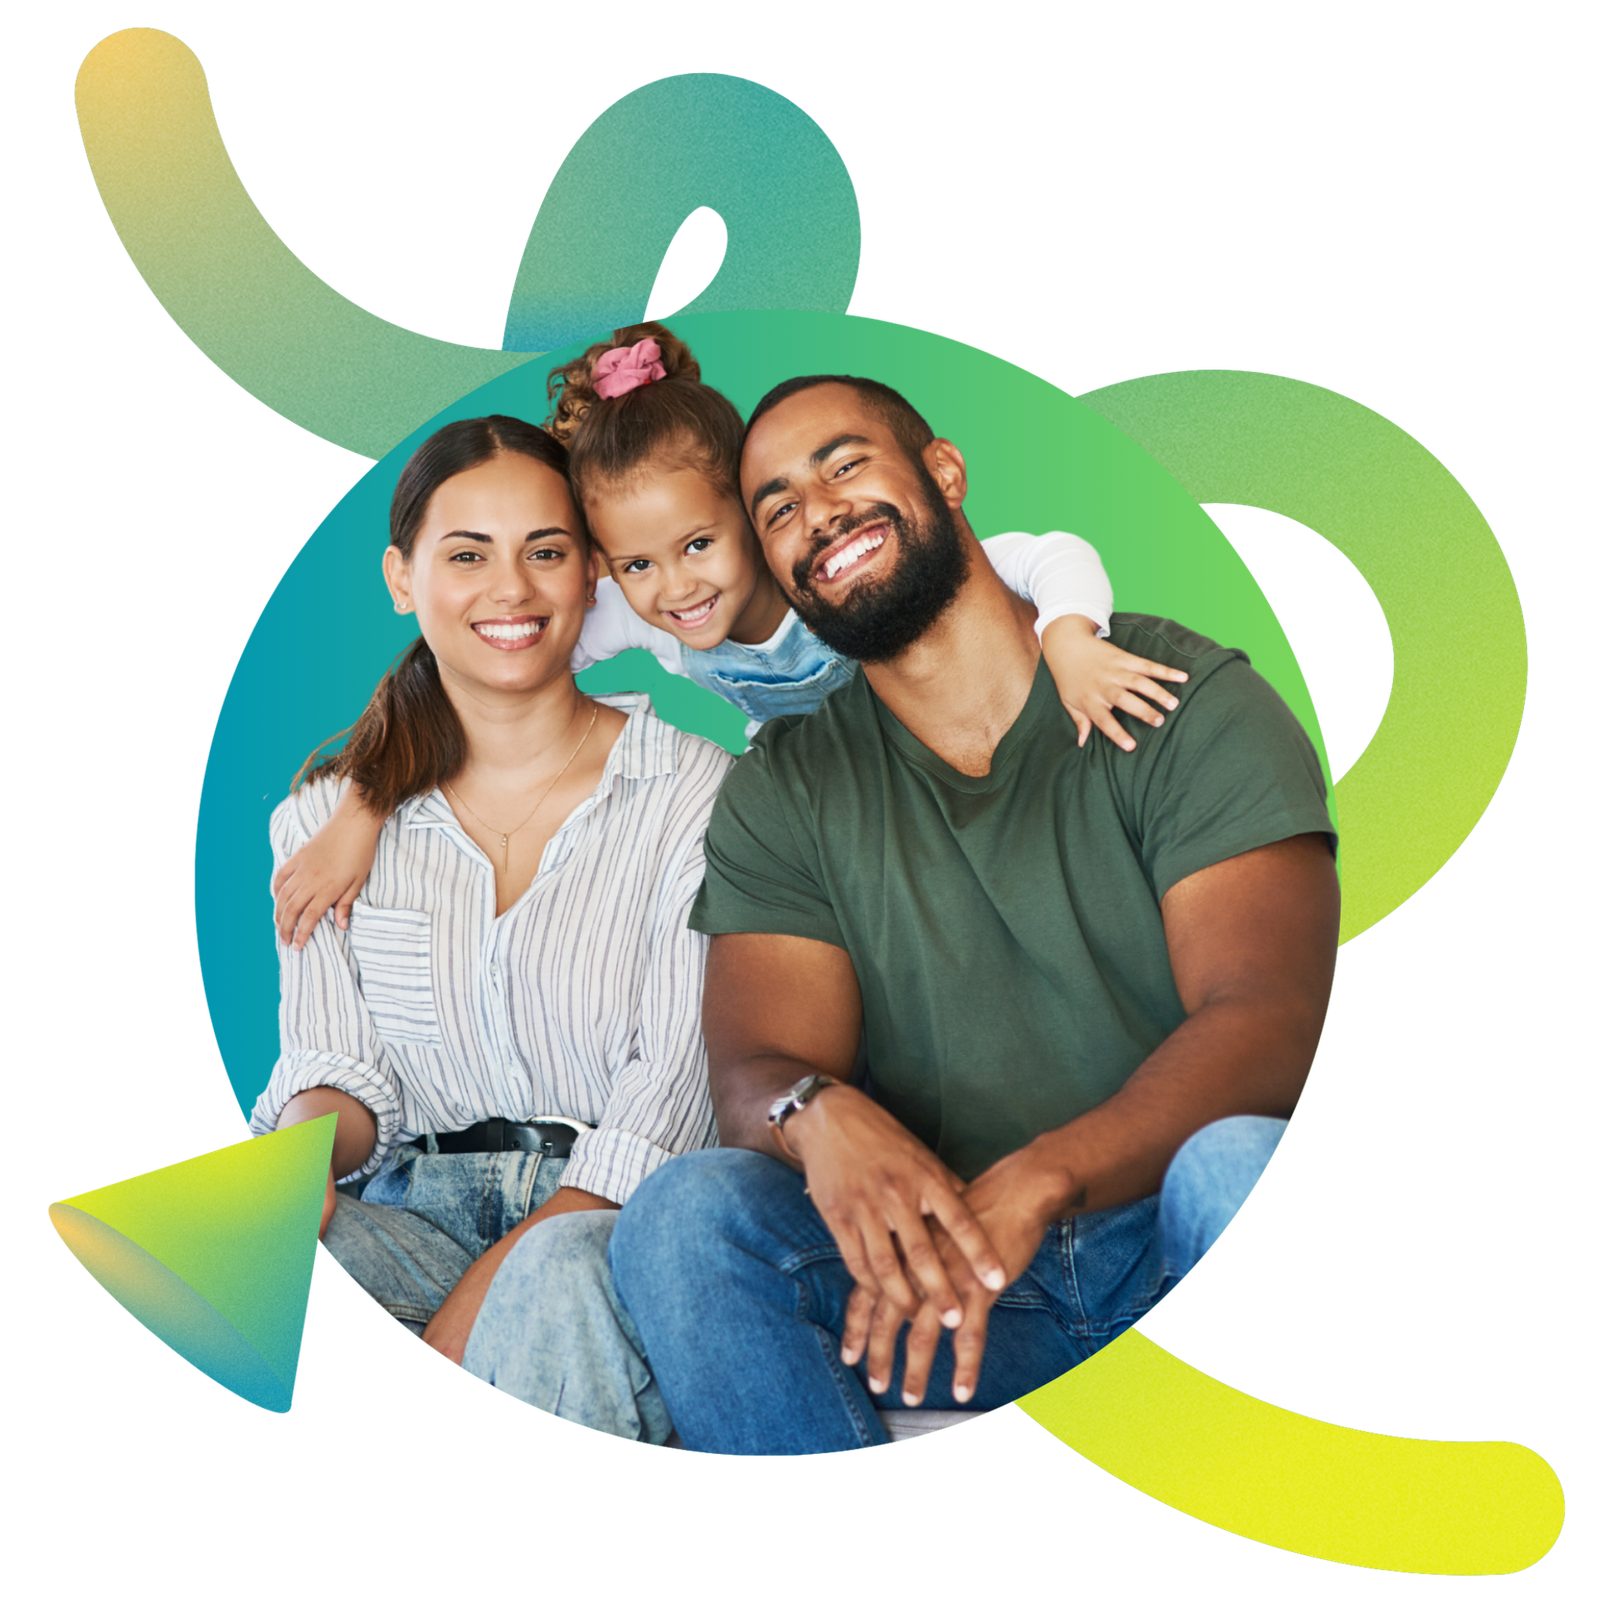 Happy family sitting together on a couch and smiling at the camera, portraying a warm, united home environment embodying positive mental health - Light Side Wellness Co.